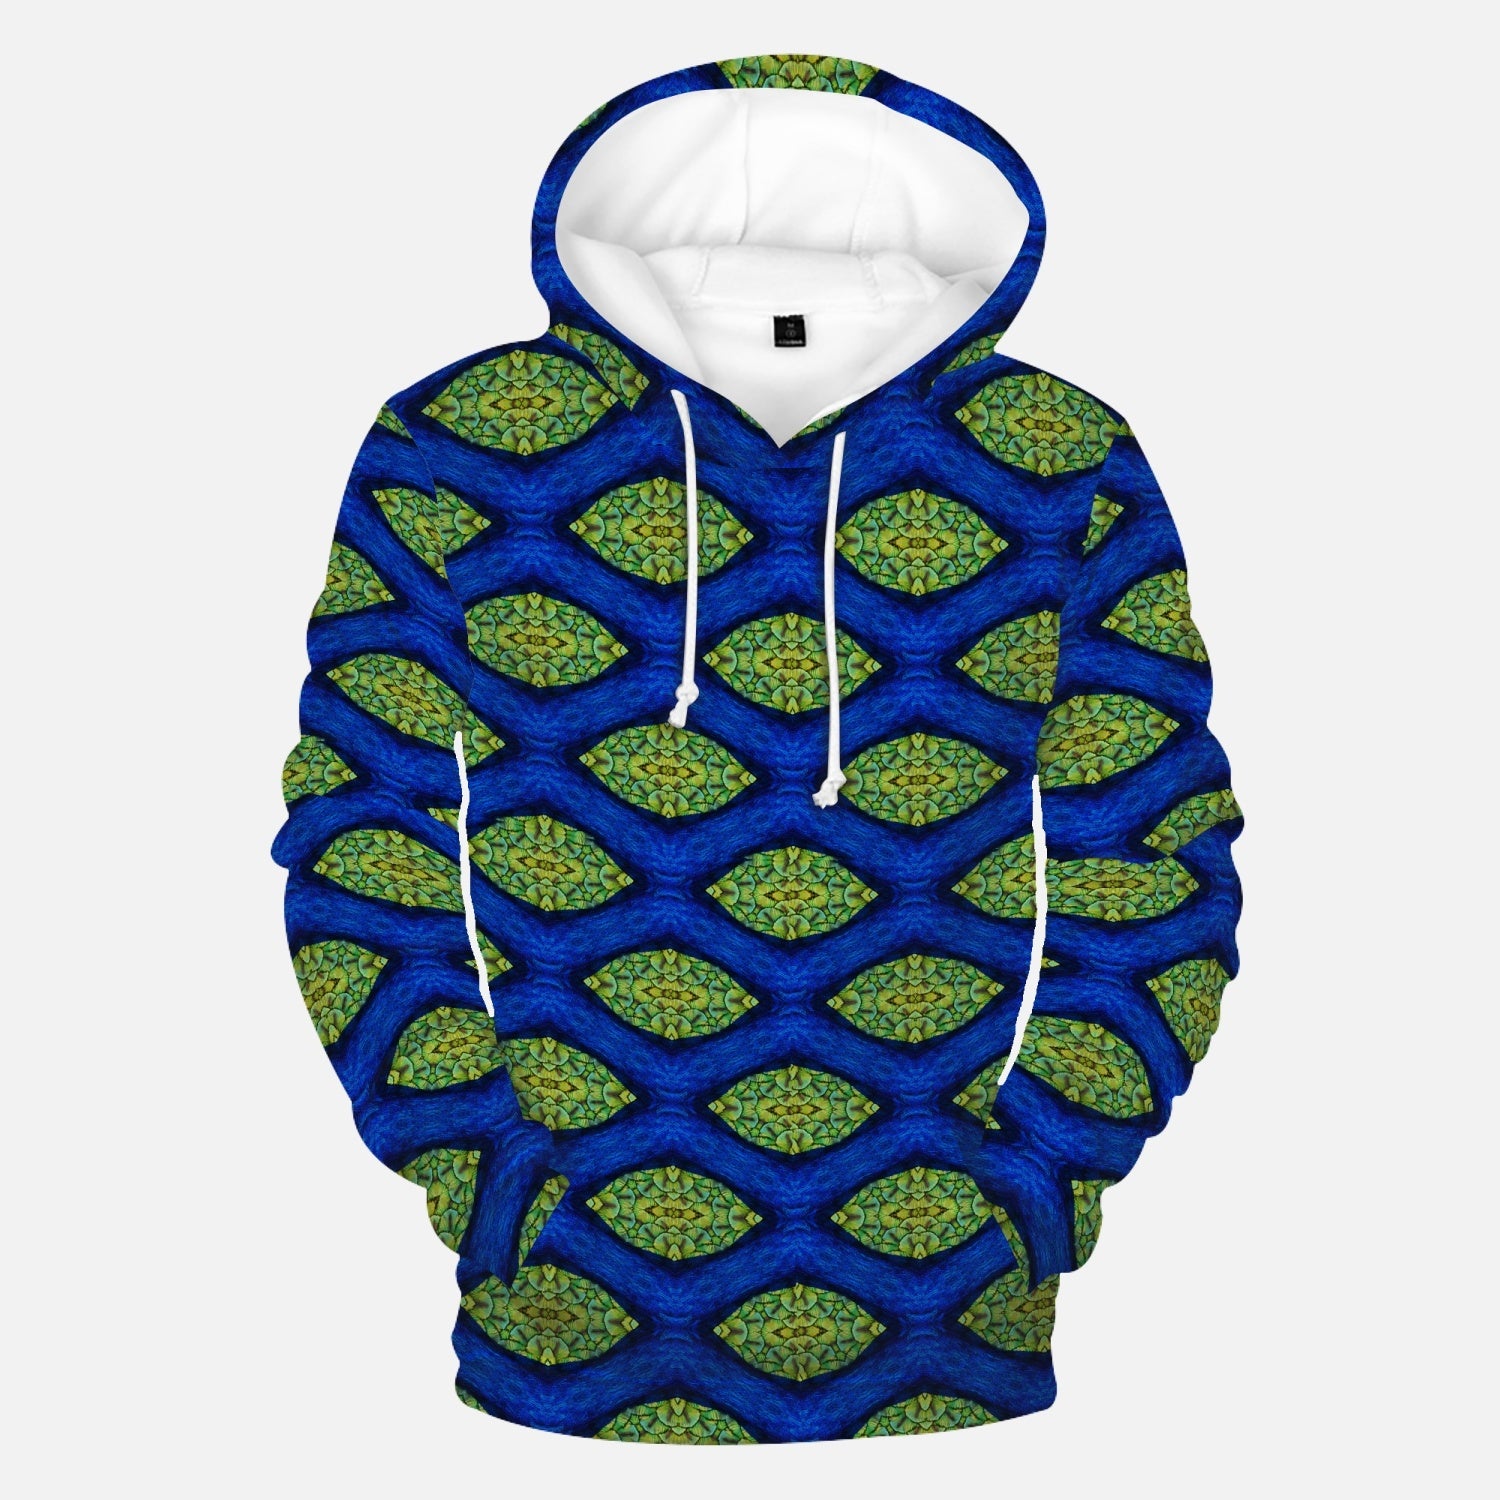 The Heart and Brain Connection  Round Collar Hoodie, by Sensus Studio Design